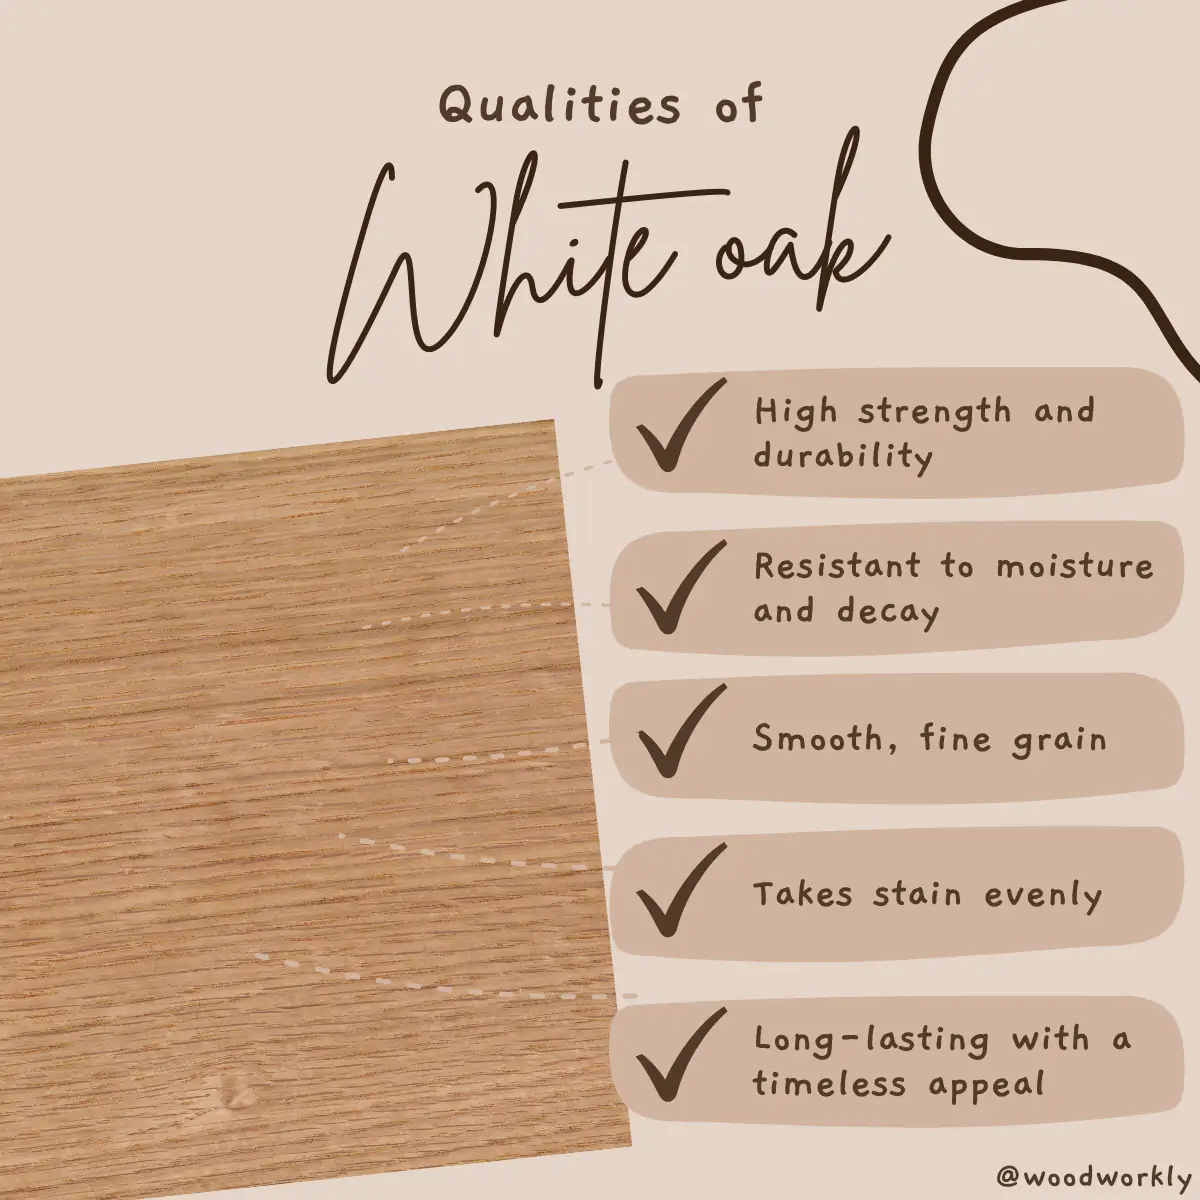 Qualities of White oak wood important when making a bed frame